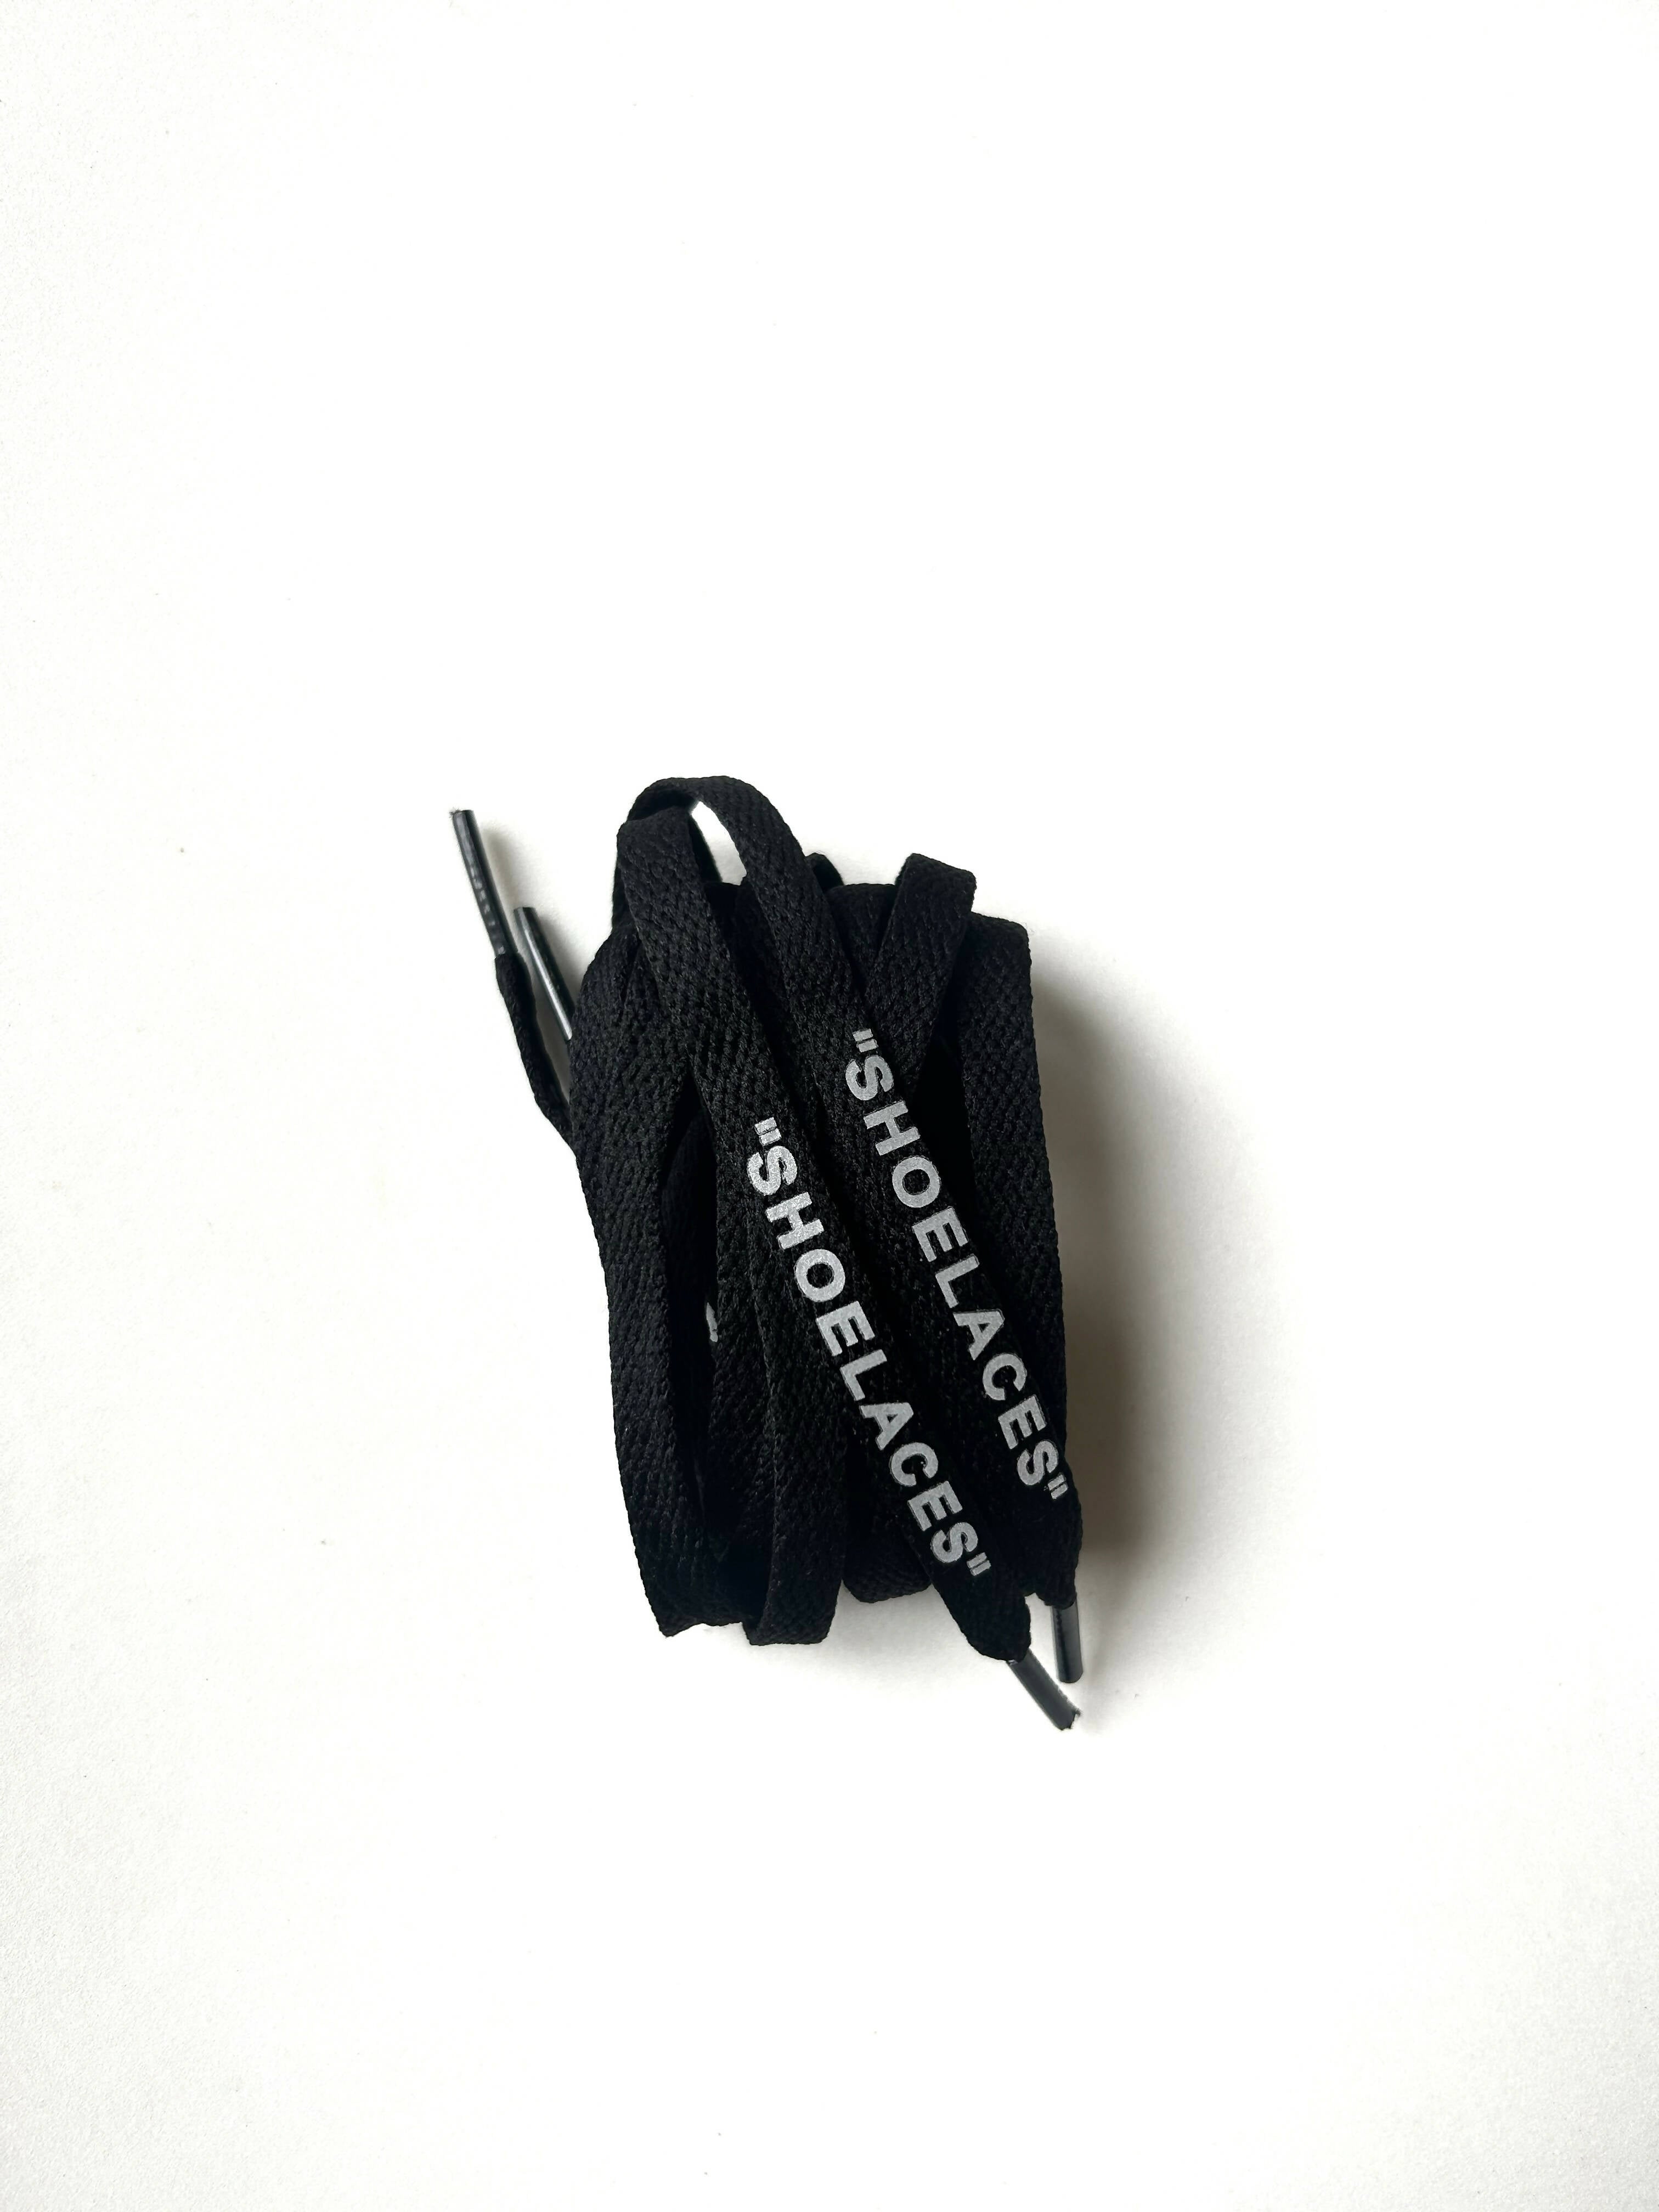 "Shoelaces 3m Reflective" Off-White style flat lace by TGLC